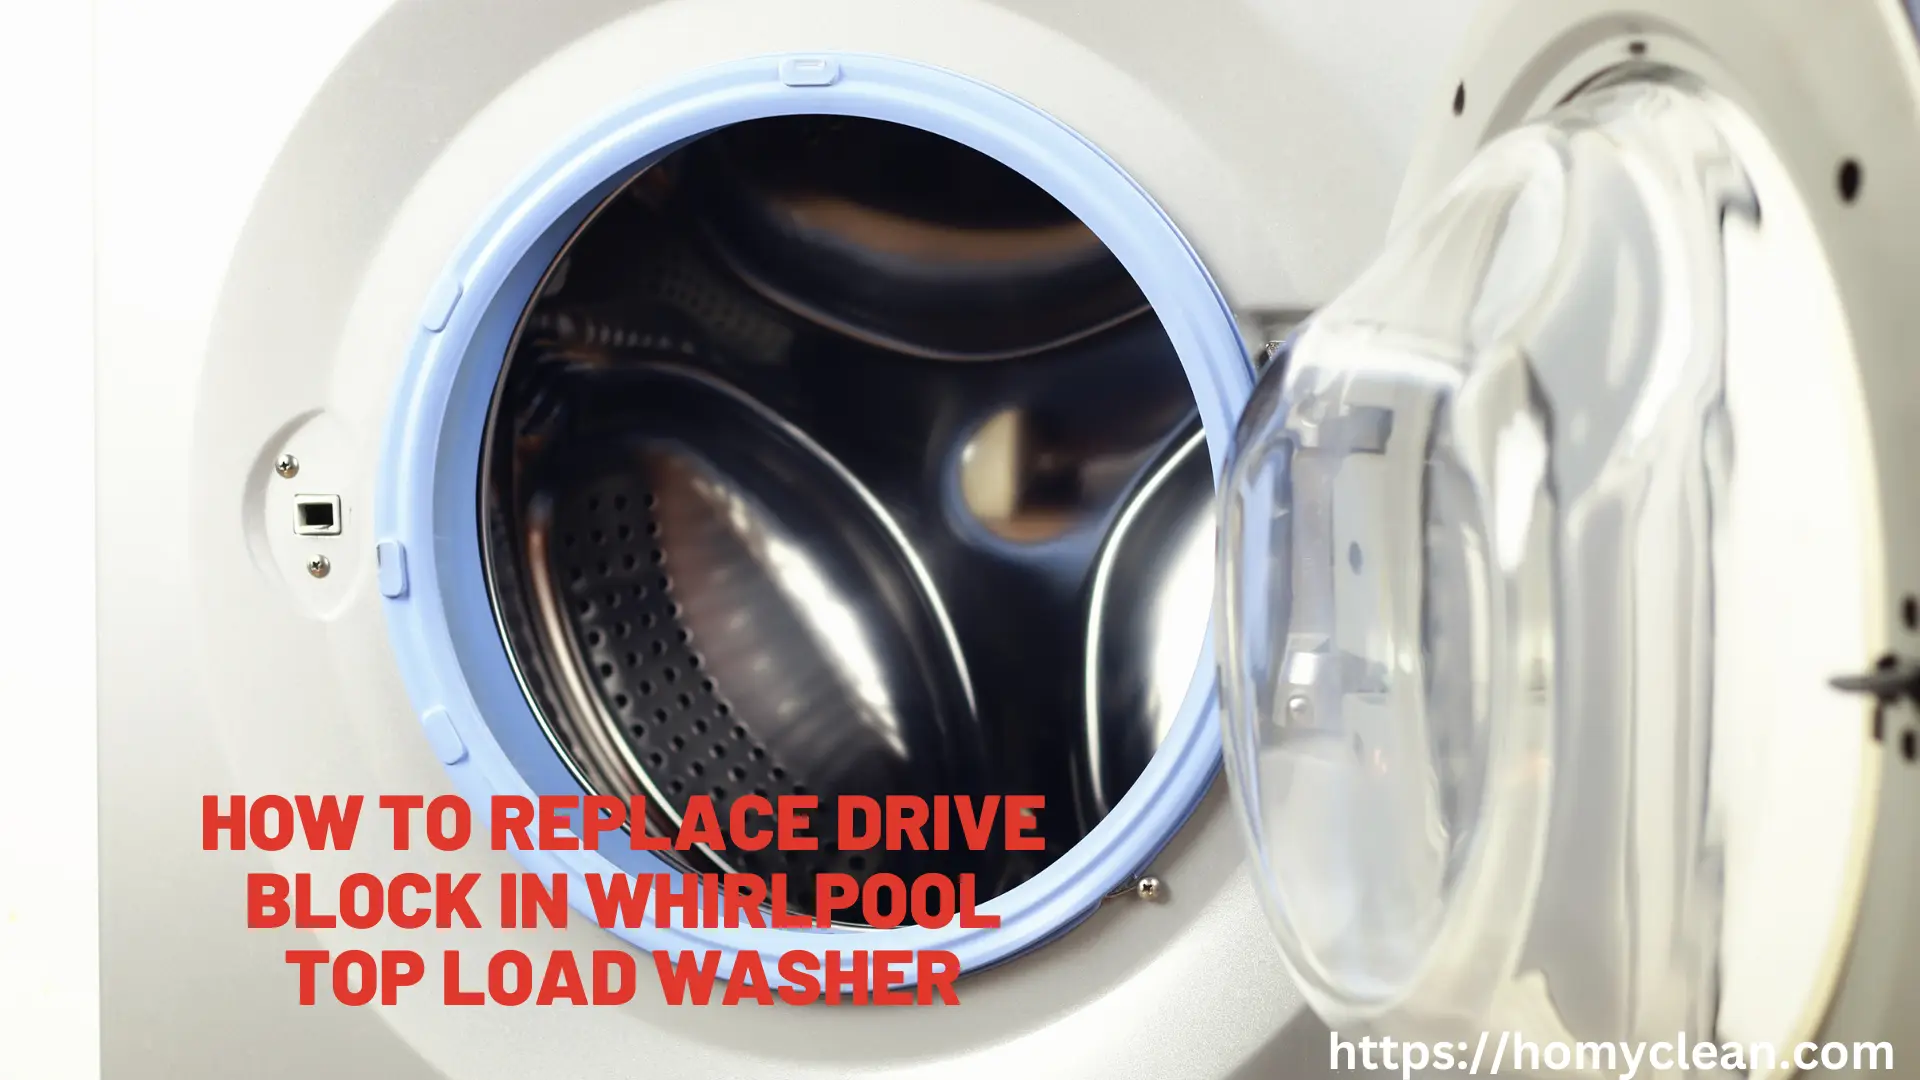 How to Replace Drive Block in Whirlpool Top Load Washer